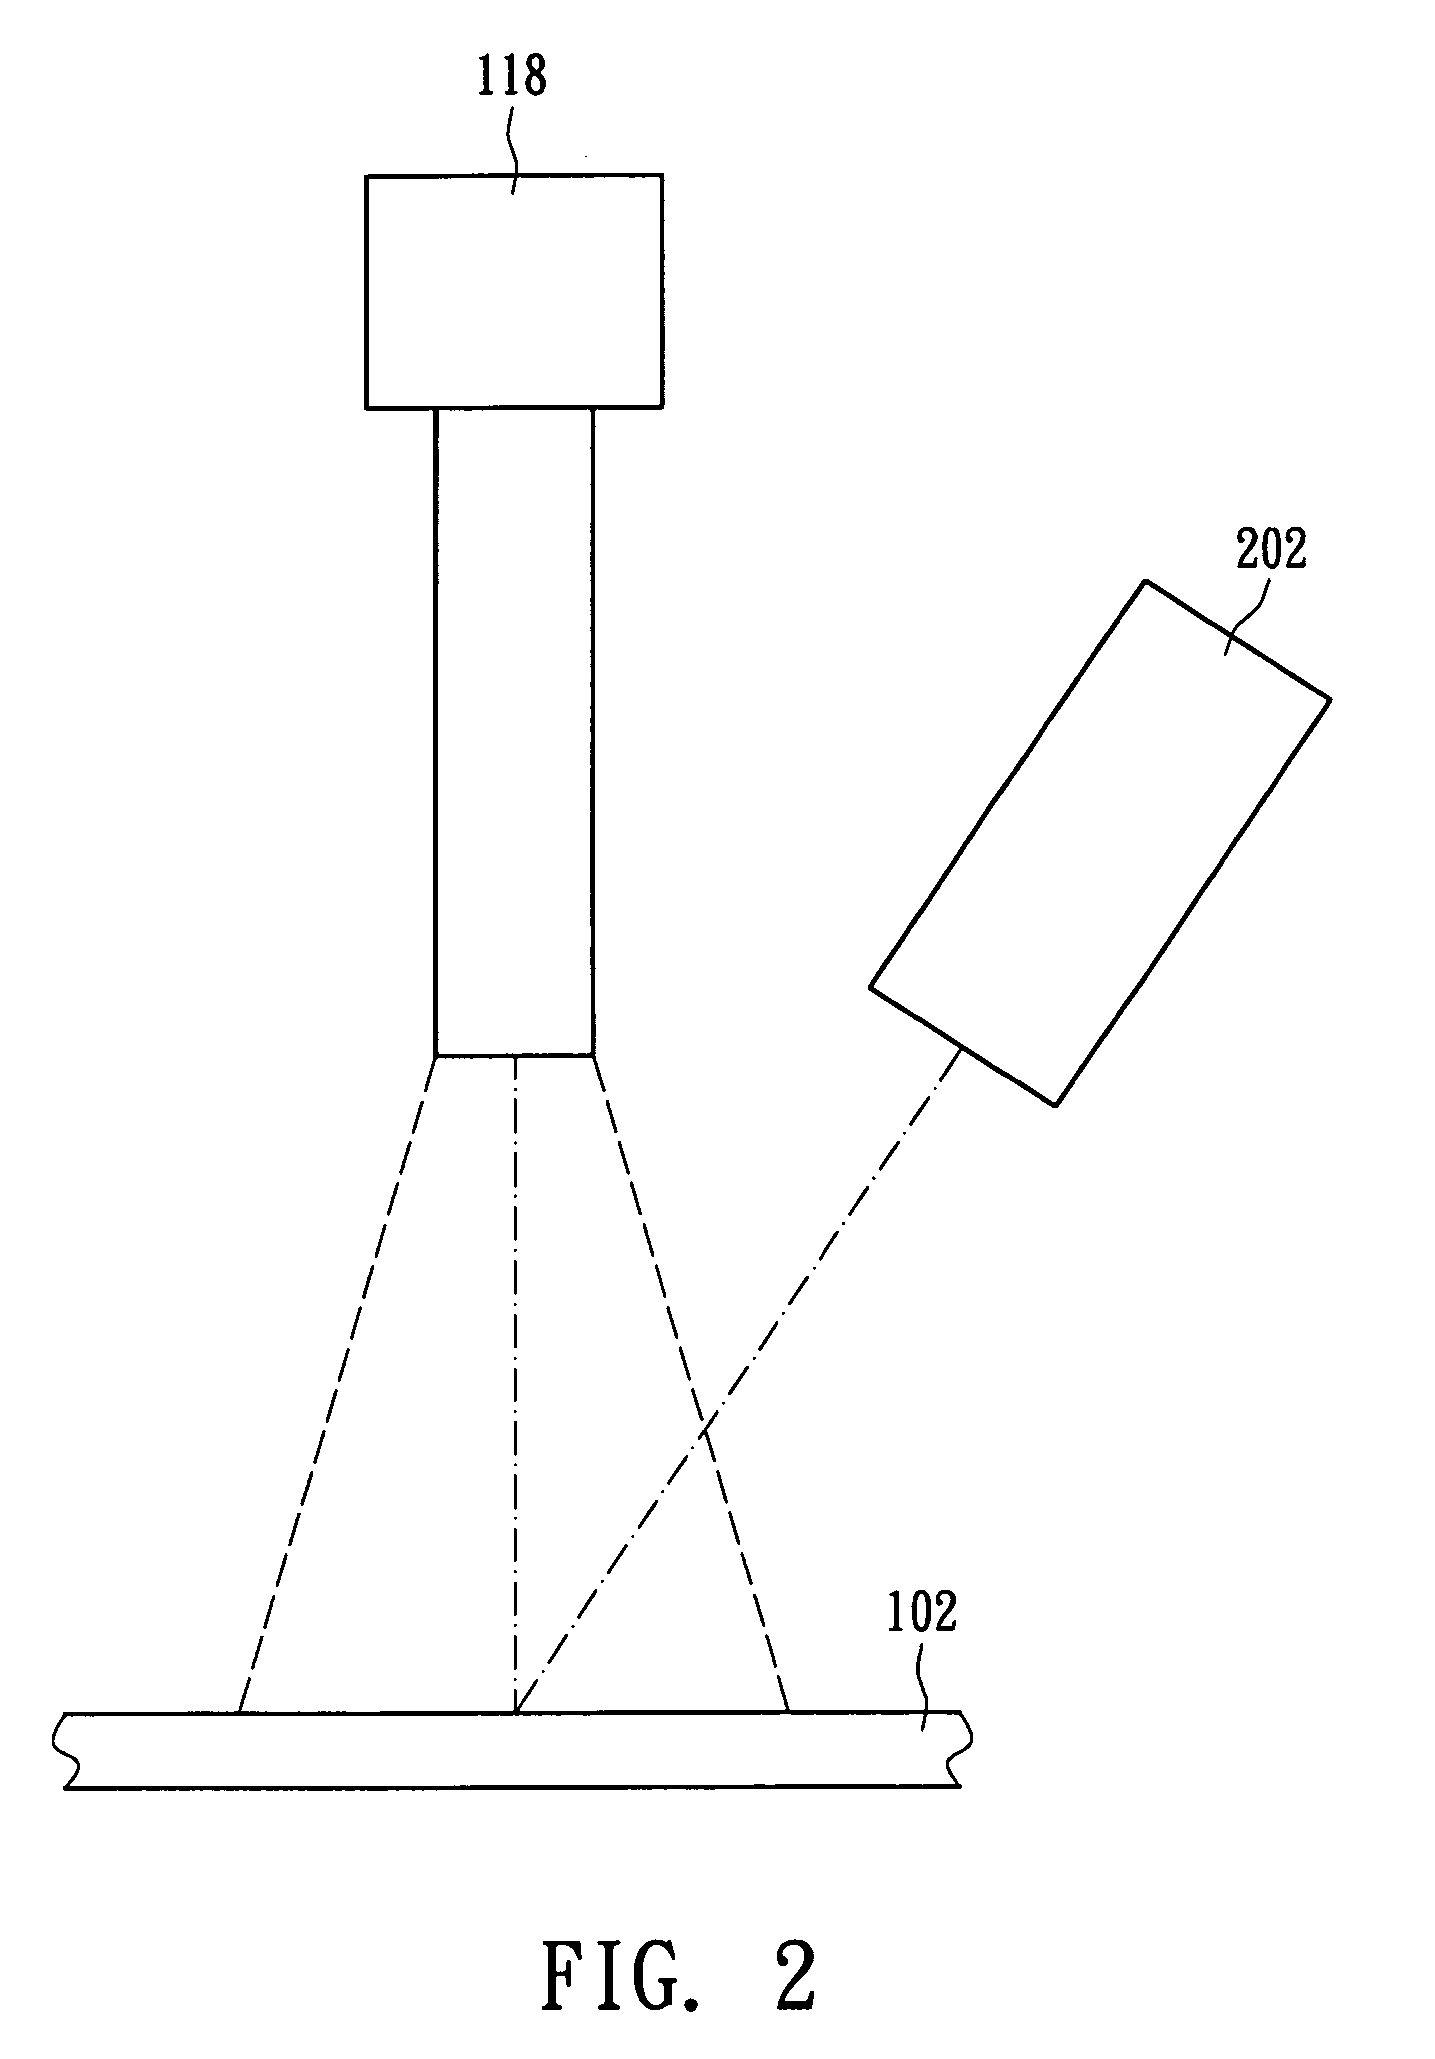 Optical imaging apparatus and method for inspecting solar cells